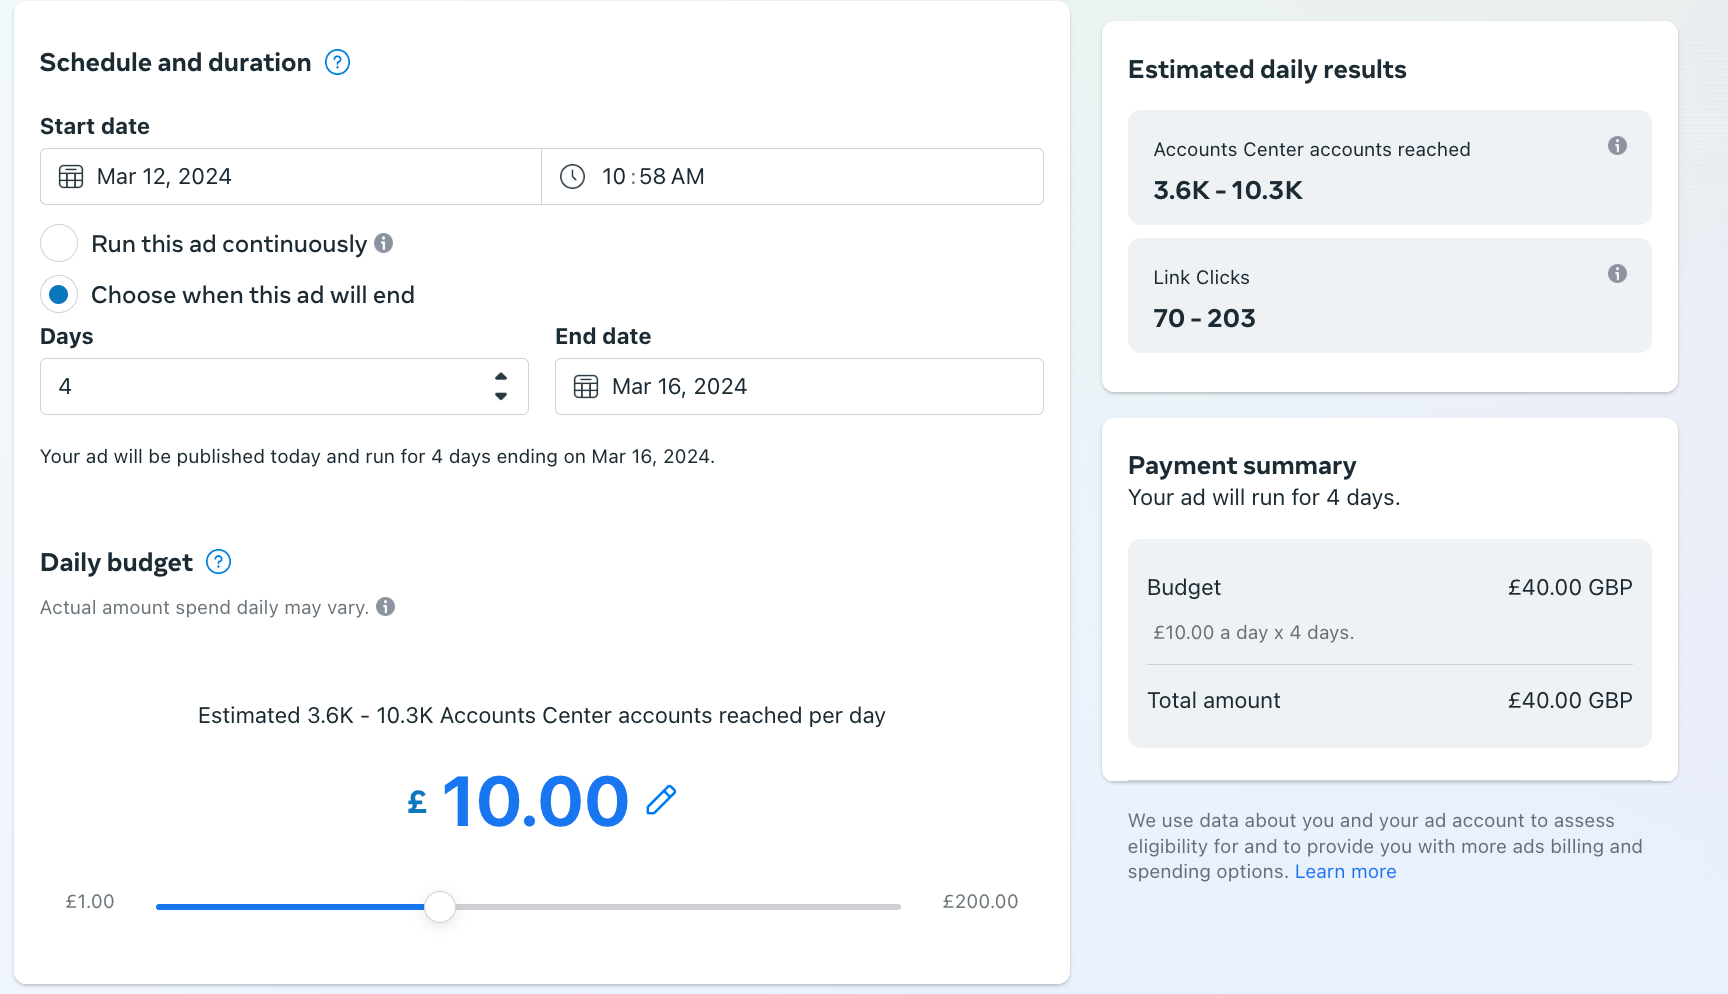 Facebook shows you can reach up to 10,000 people with a daily budget of £10.